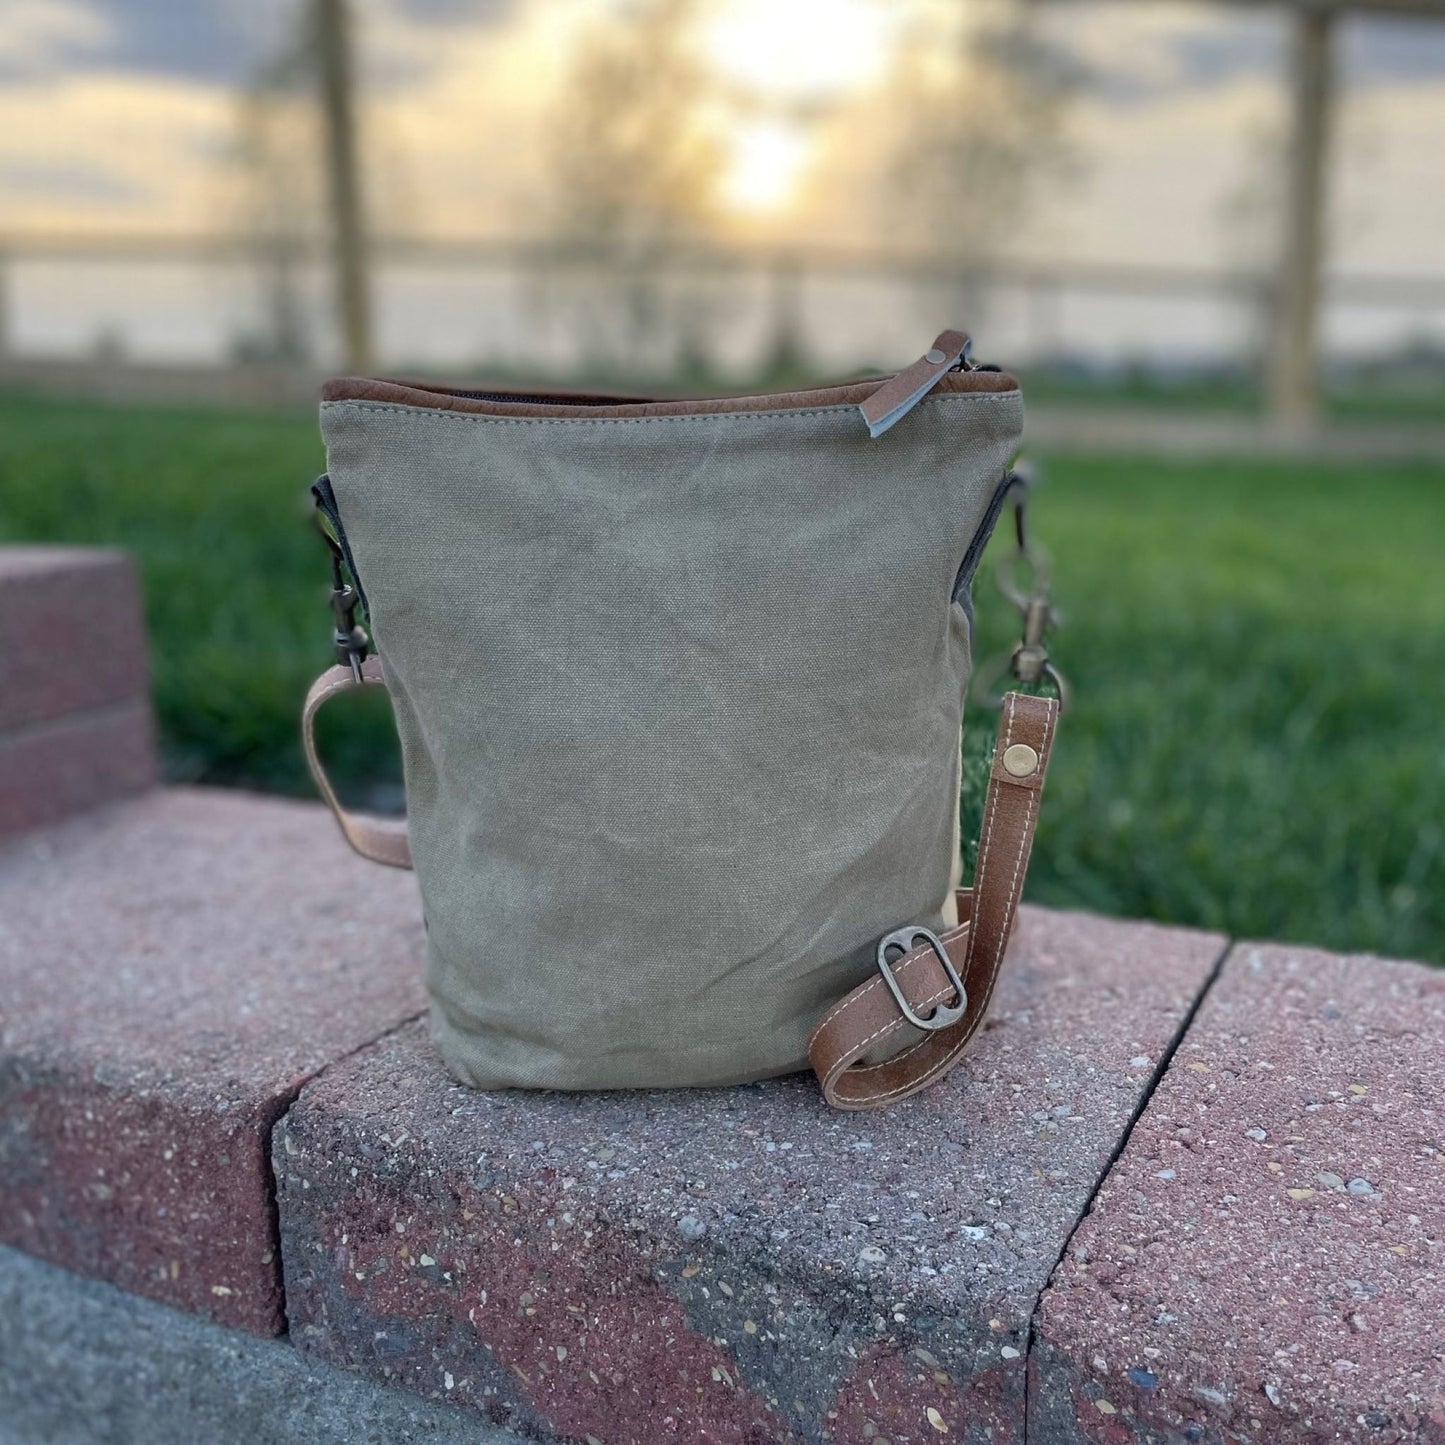 Customized VETERAN CROSSBODY - Special Order for Your Branch!